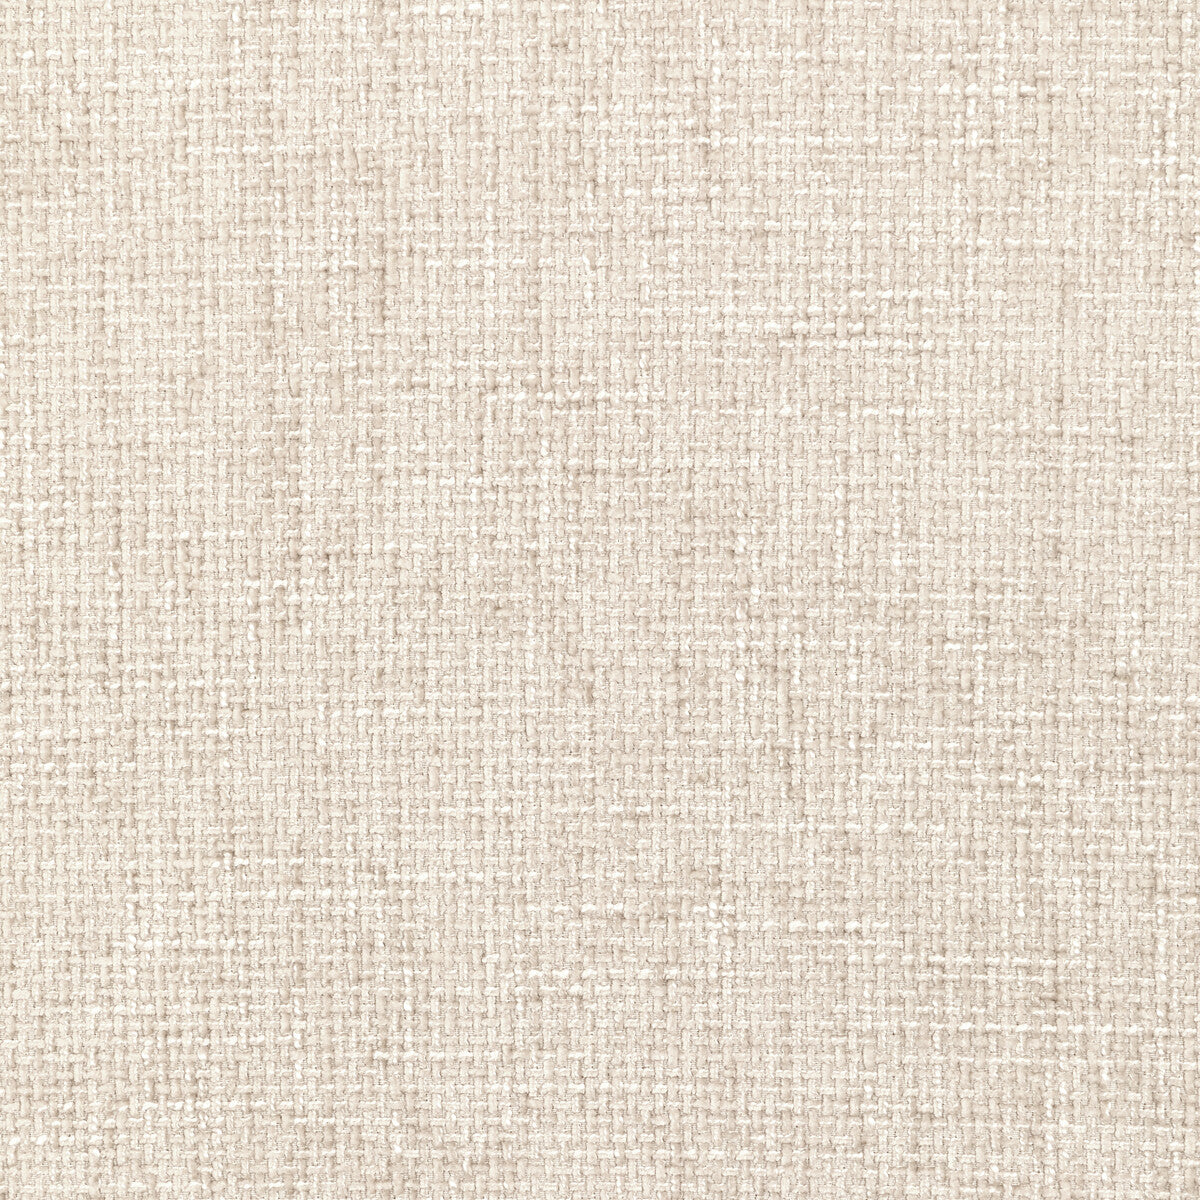 Kravet Smart fabric in 36305-1 color - pattern 36305.1.0 - by Kravet Smart in the Performance Crypton Home collection